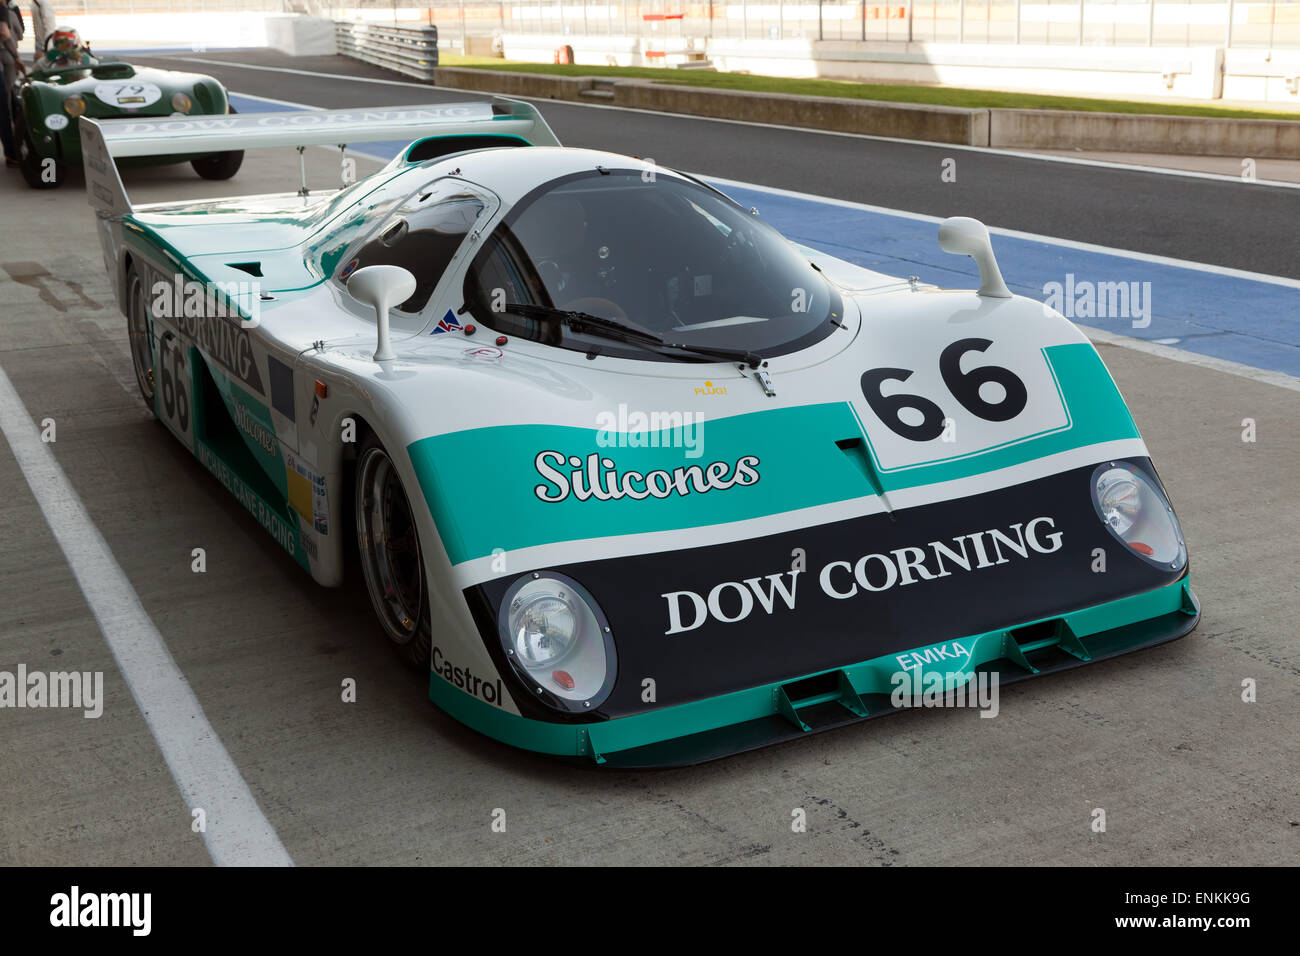 EMKA C84/1 Racing  Car in the Pit lane, during the Silverstone Classic media Day, Stock Photo